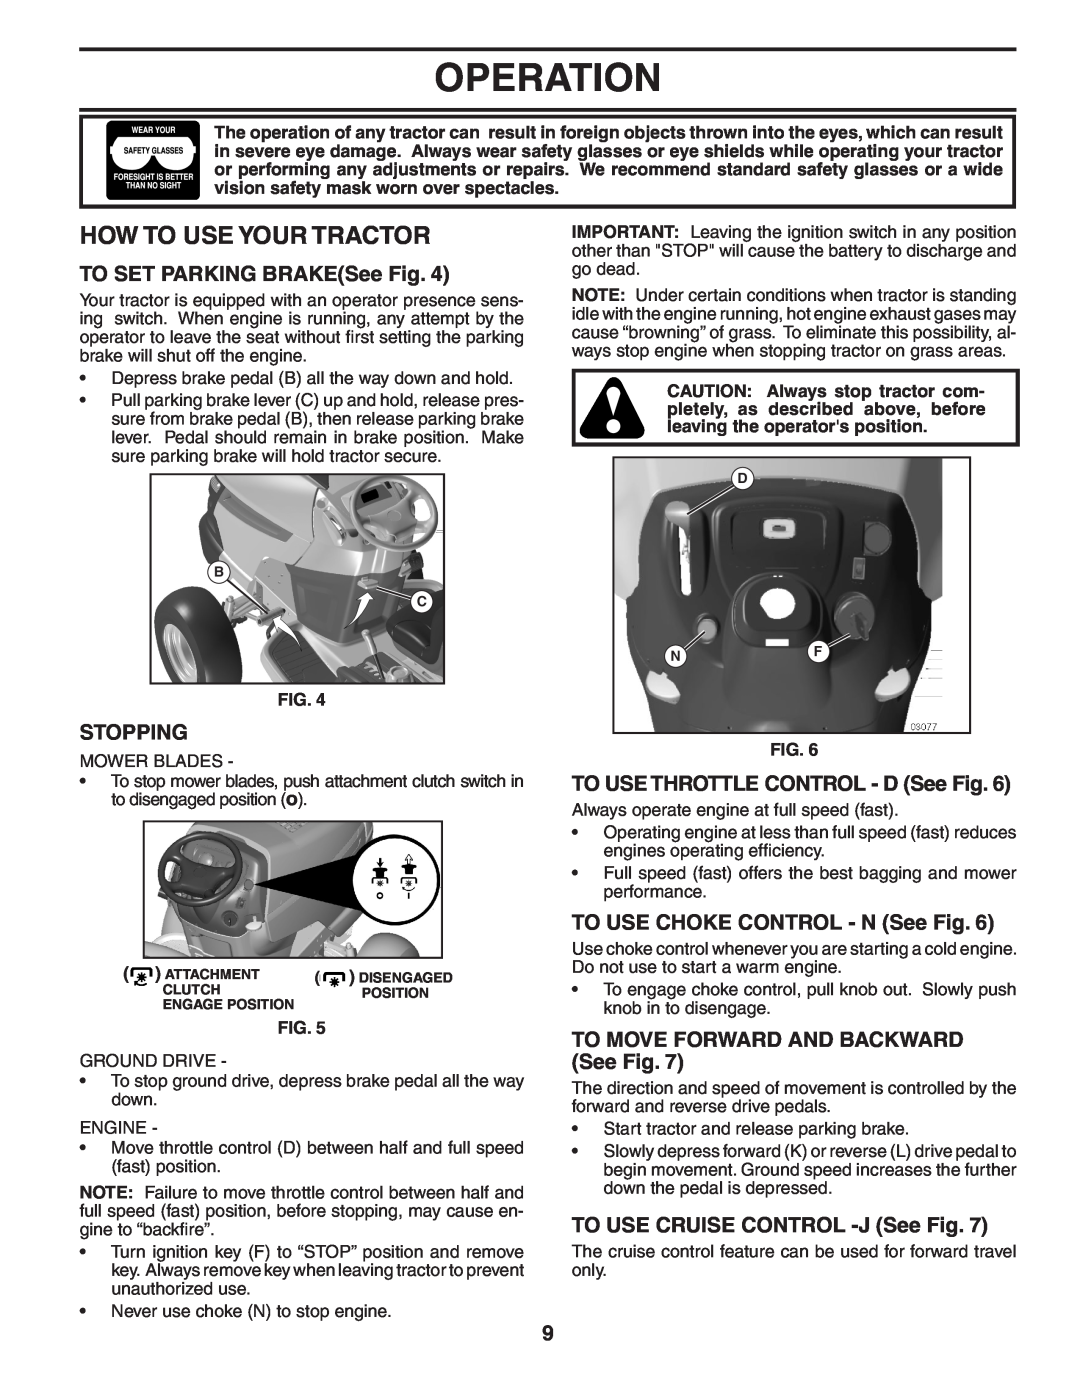 Poulan 404489 manual How To Use Your Tractor, TO SET PARKING BRAKESee Fig, Stopping, TO USE THROTTLE CONTROL - D See Fig 